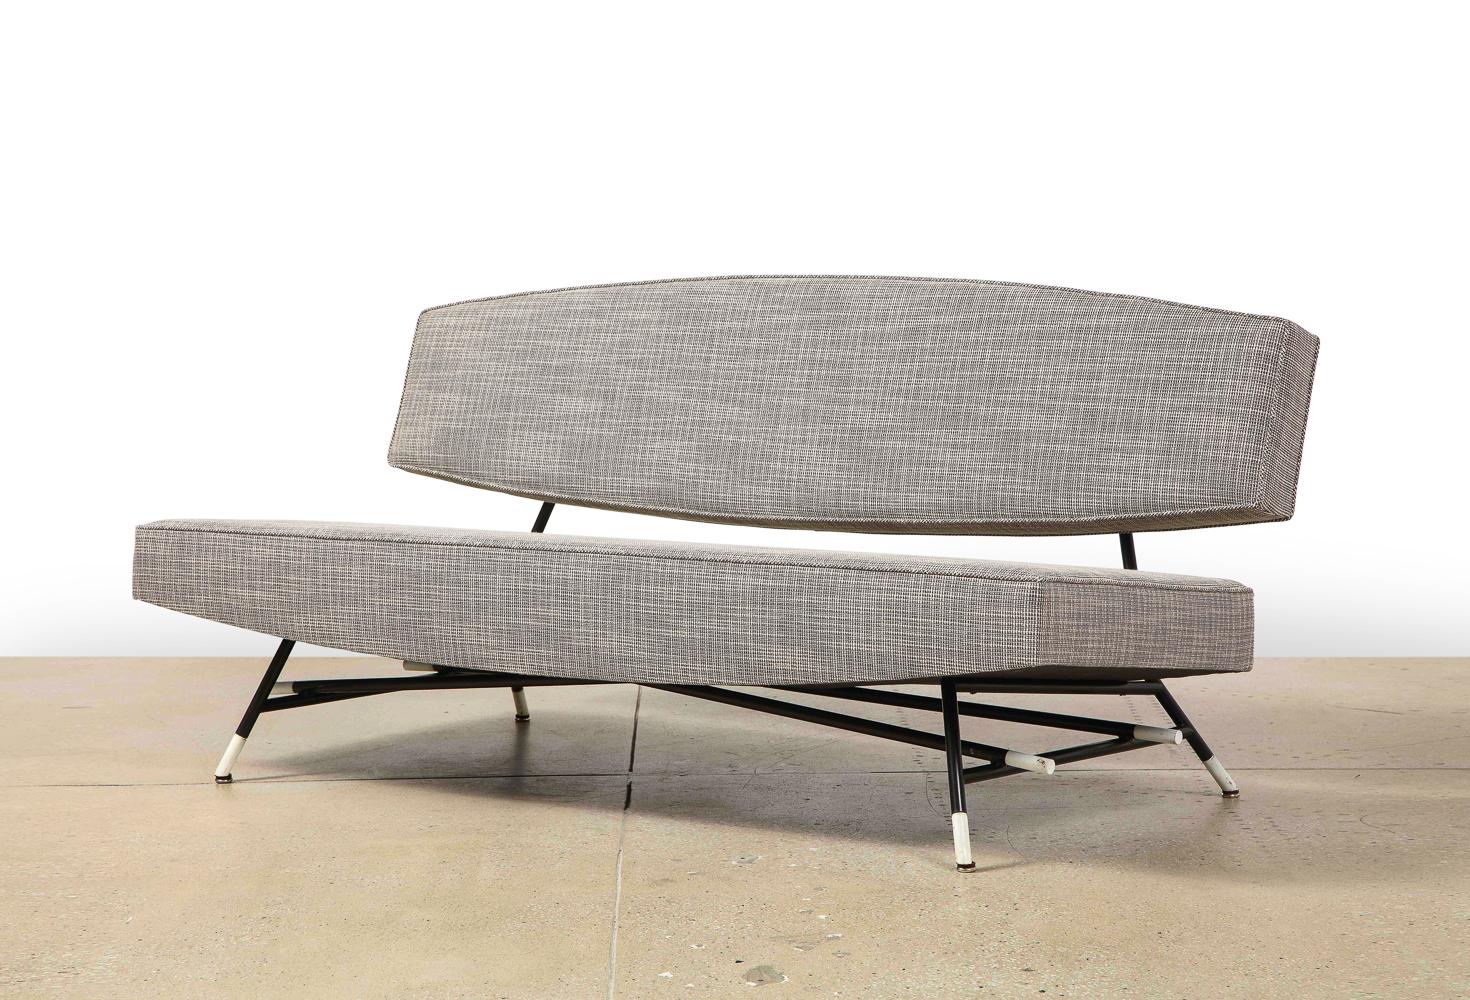 Rare 865 sofa by Ico Parisi for Cassina. Black & white painted steel, fabric. Produced by Cassina. Recently re-upholstered. Metal appears to have been re-painted at some point, but shows overall signs of wear.